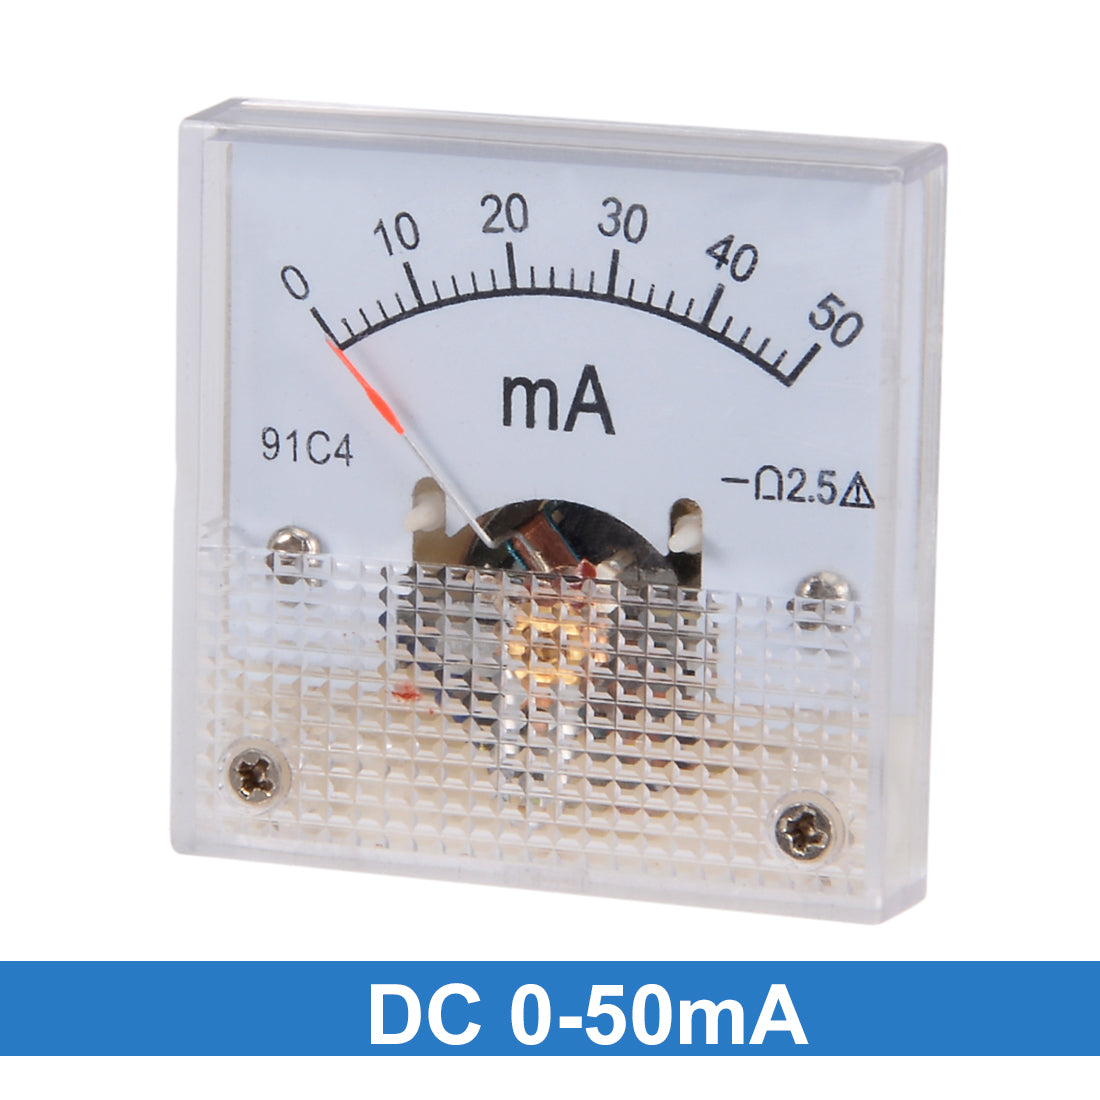 uxcell Uxcell 91C4-A Analog Current Panel Meter DC 50mA Ammeter for Circuit Testing Tester Gauge 1 PCS